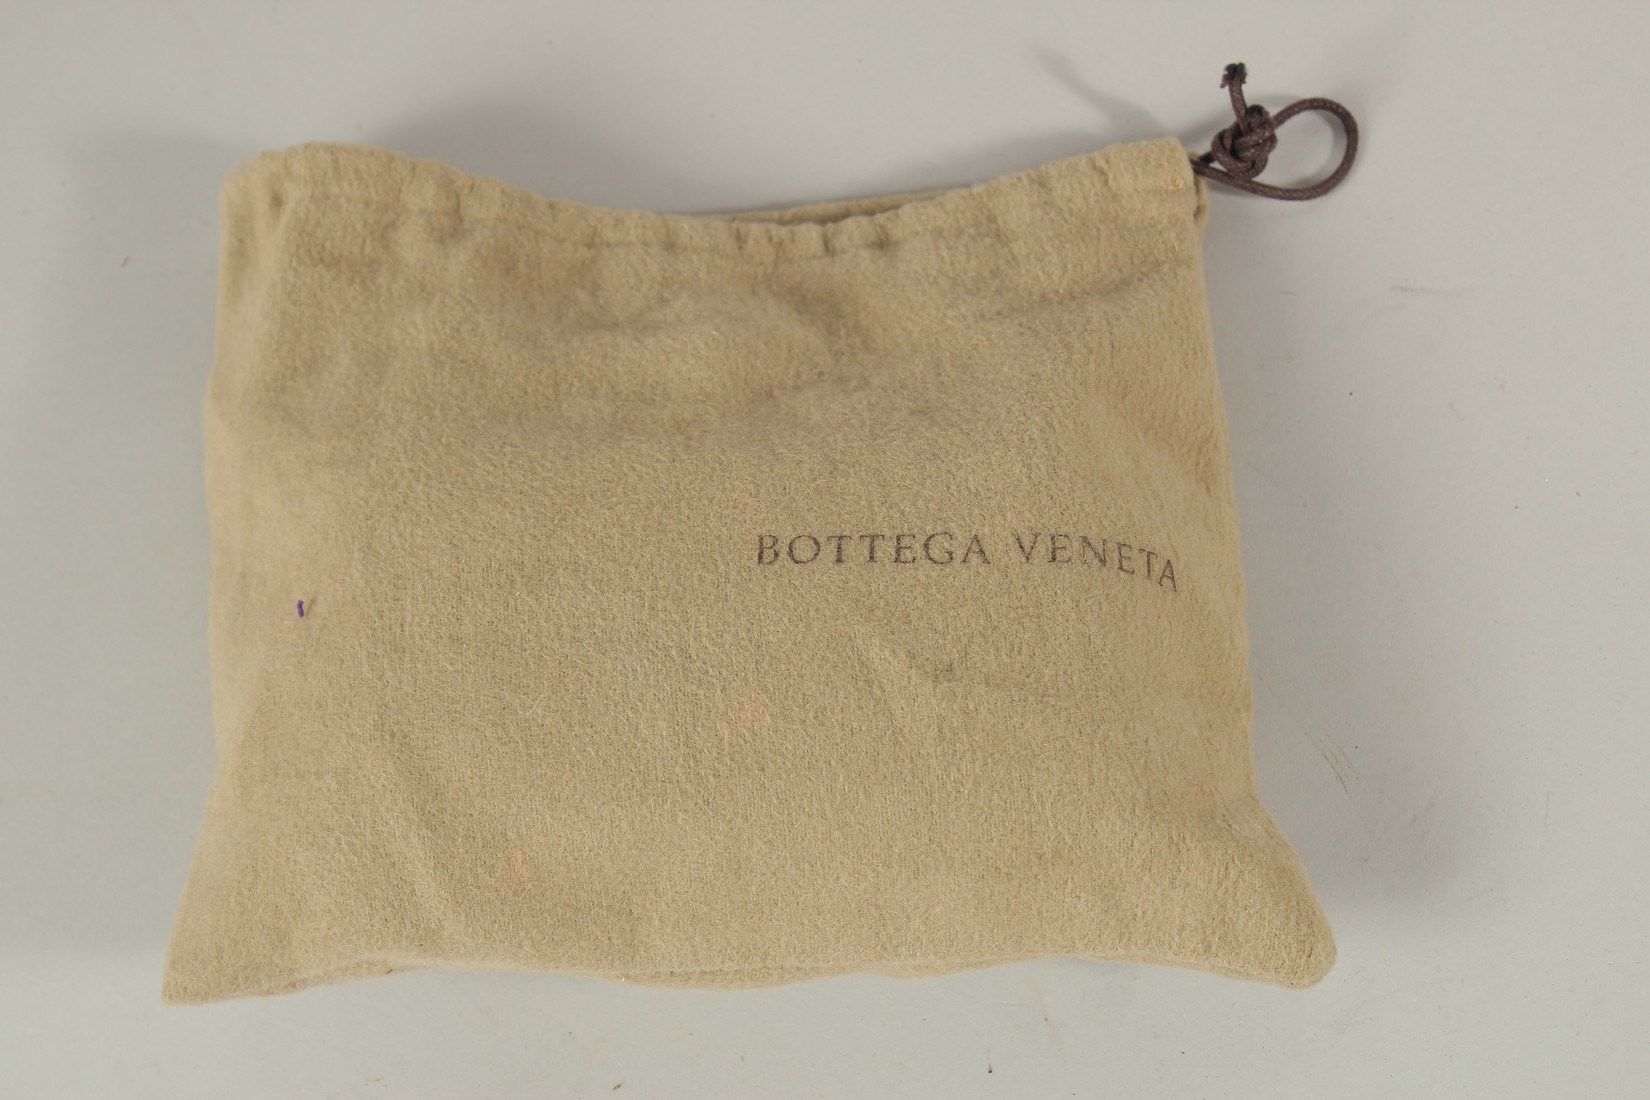 A BOTTEGA VENETA, ITALY, CLUTCH BAG with snakeskin banding. 17cms long, with a dust cover. - Image 4 of 4